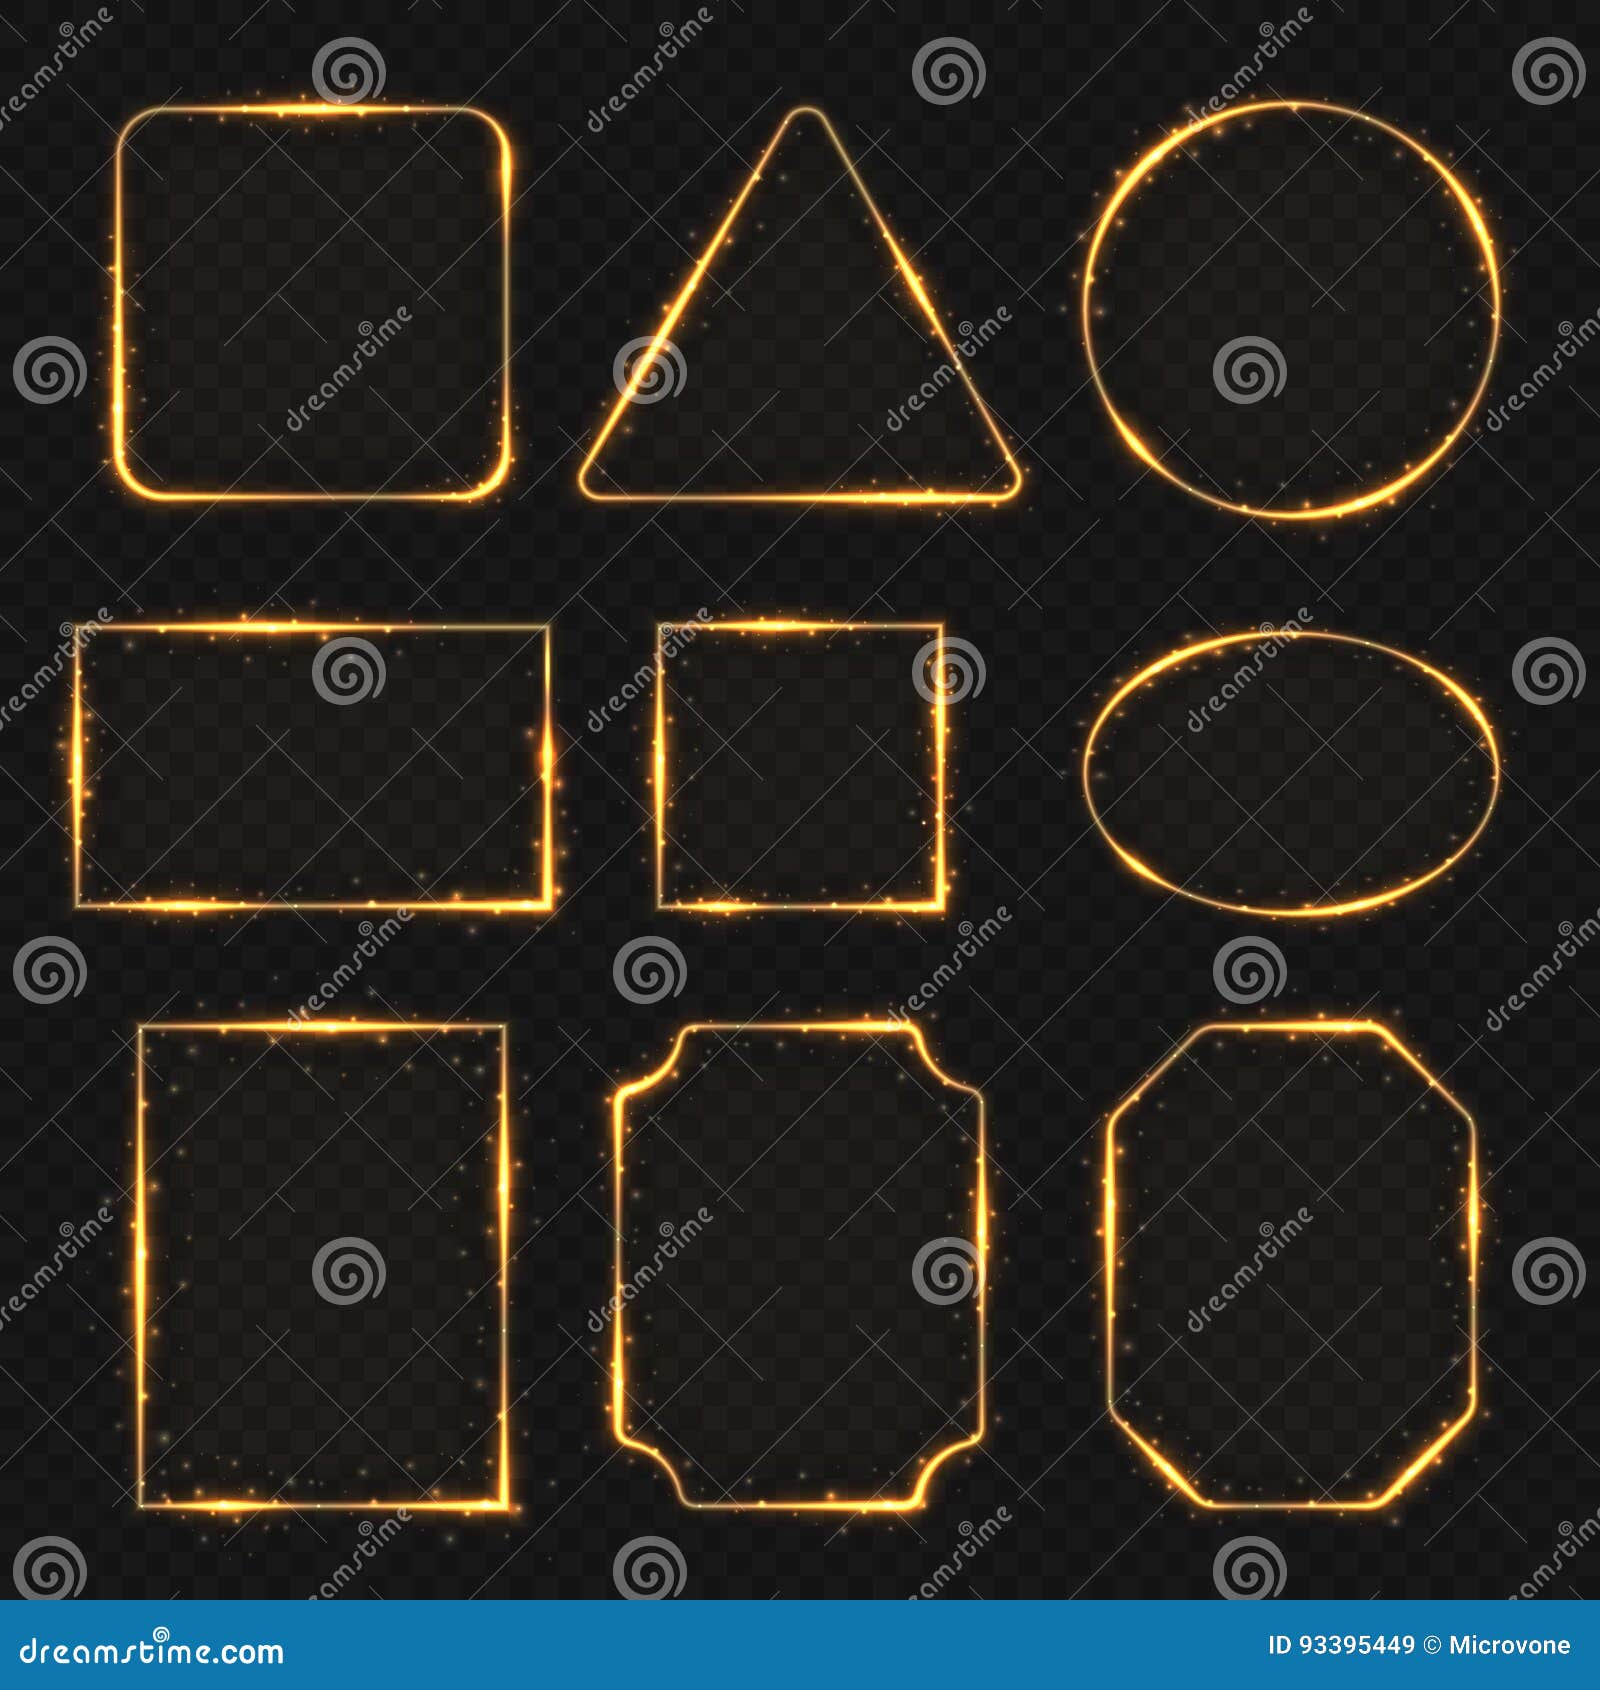 golden neon shiny electric rectangle borders. glisten round and oval banners